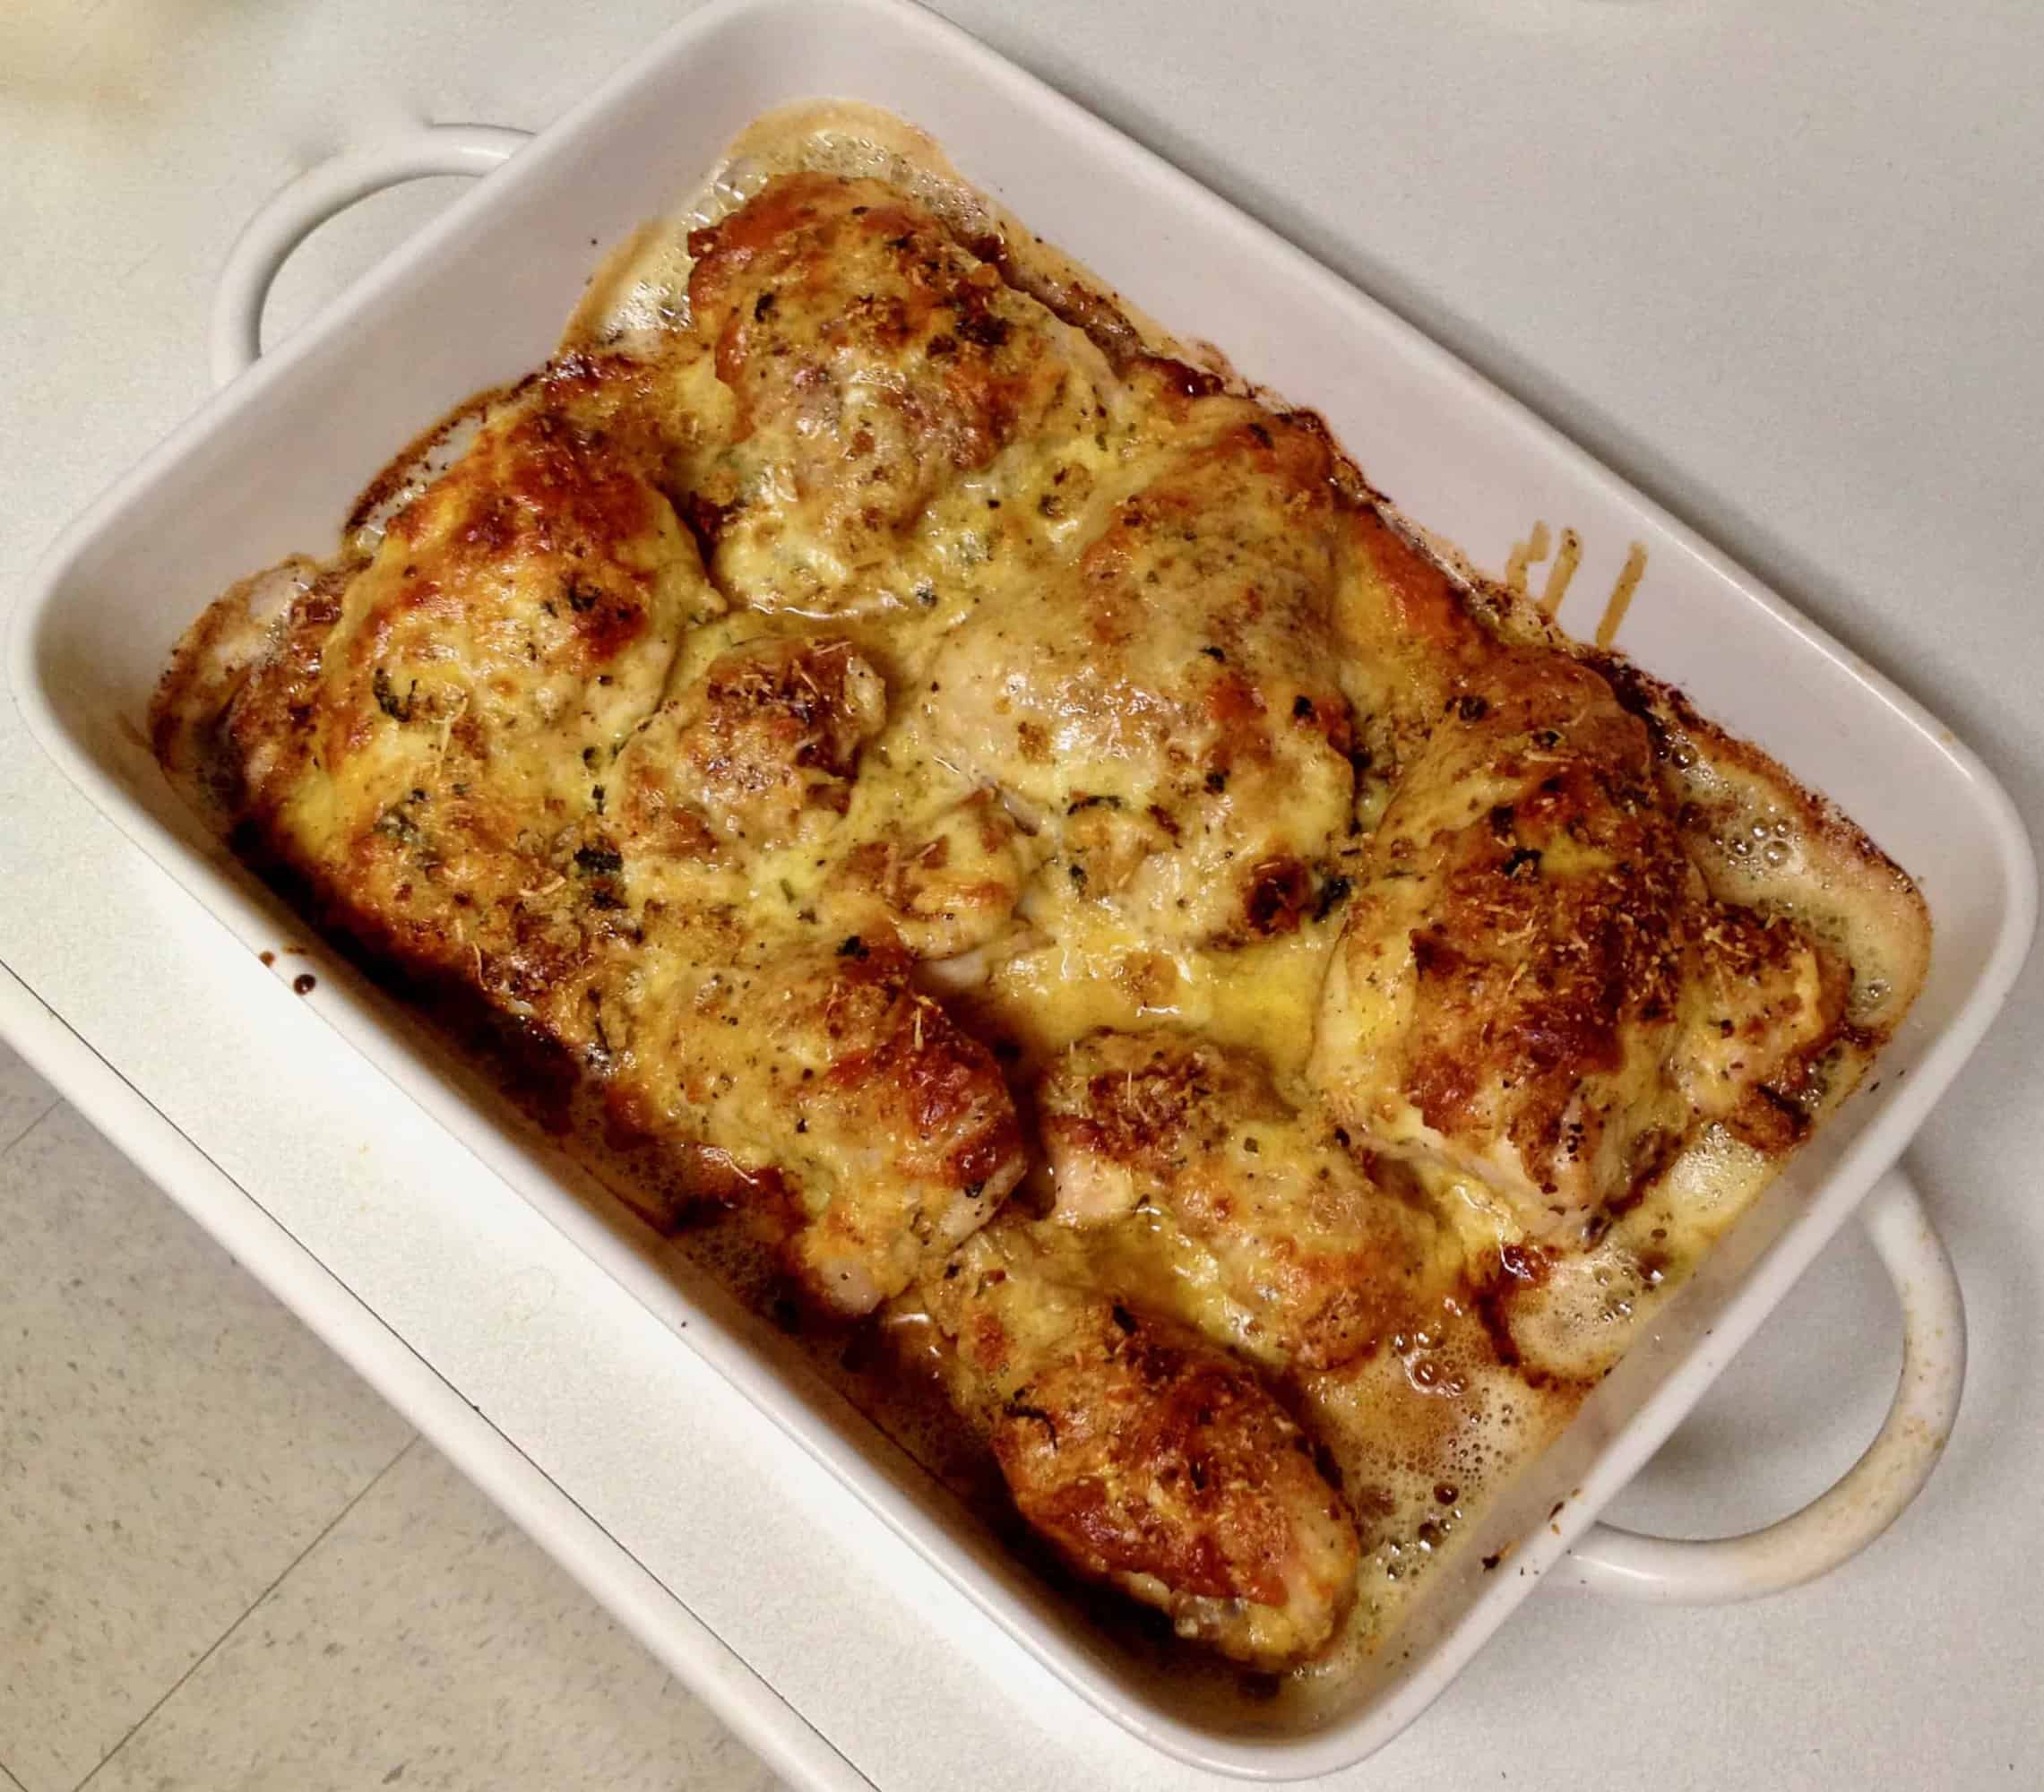 A Tale of Two Chickens: Jamie Oliver’s Chicken in Milk and Richard Olney’s Chicken Gratin